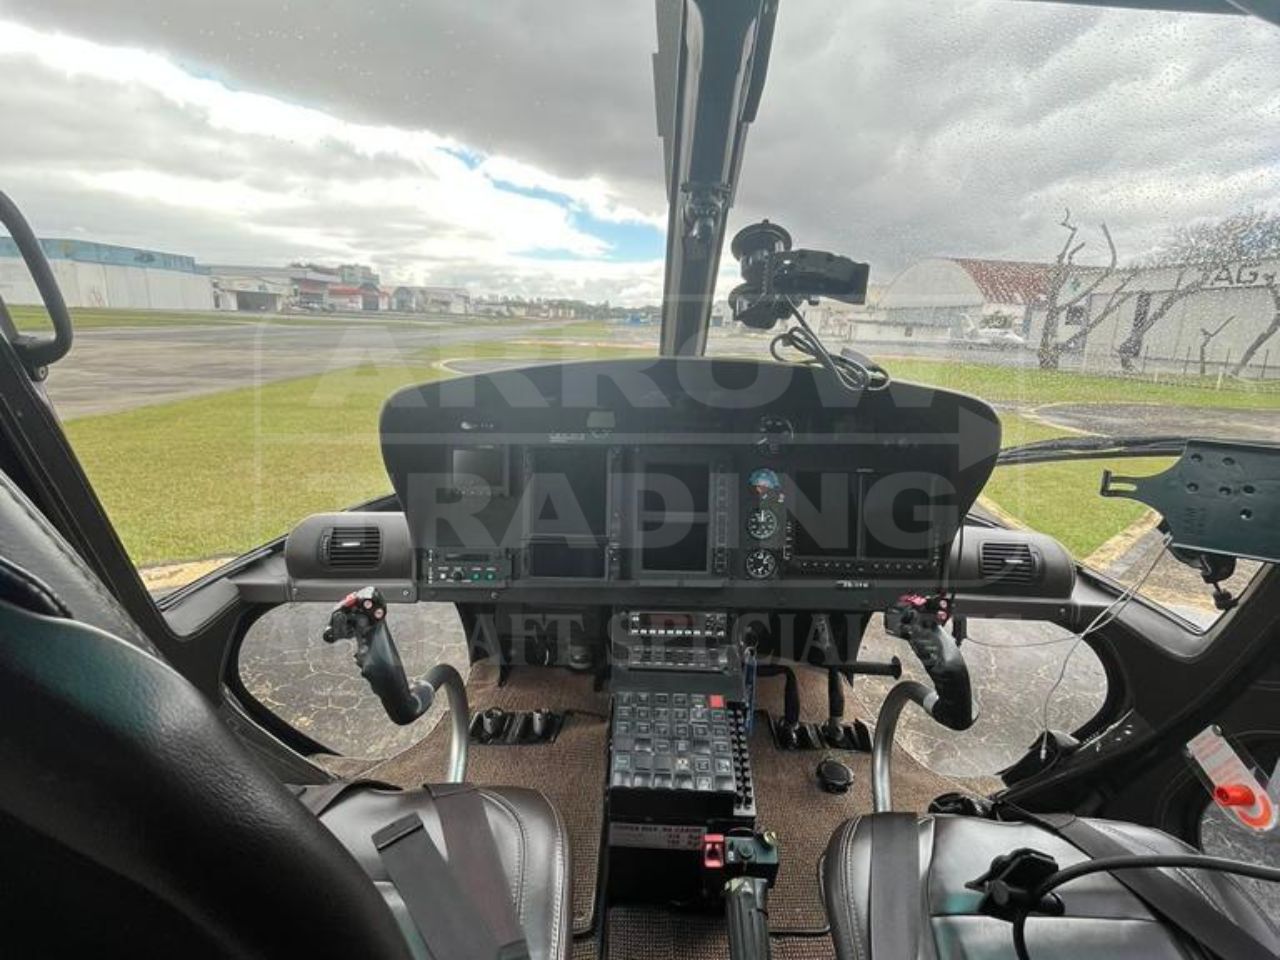 EUROCOPTER ESQUILO AS350 B3 2005